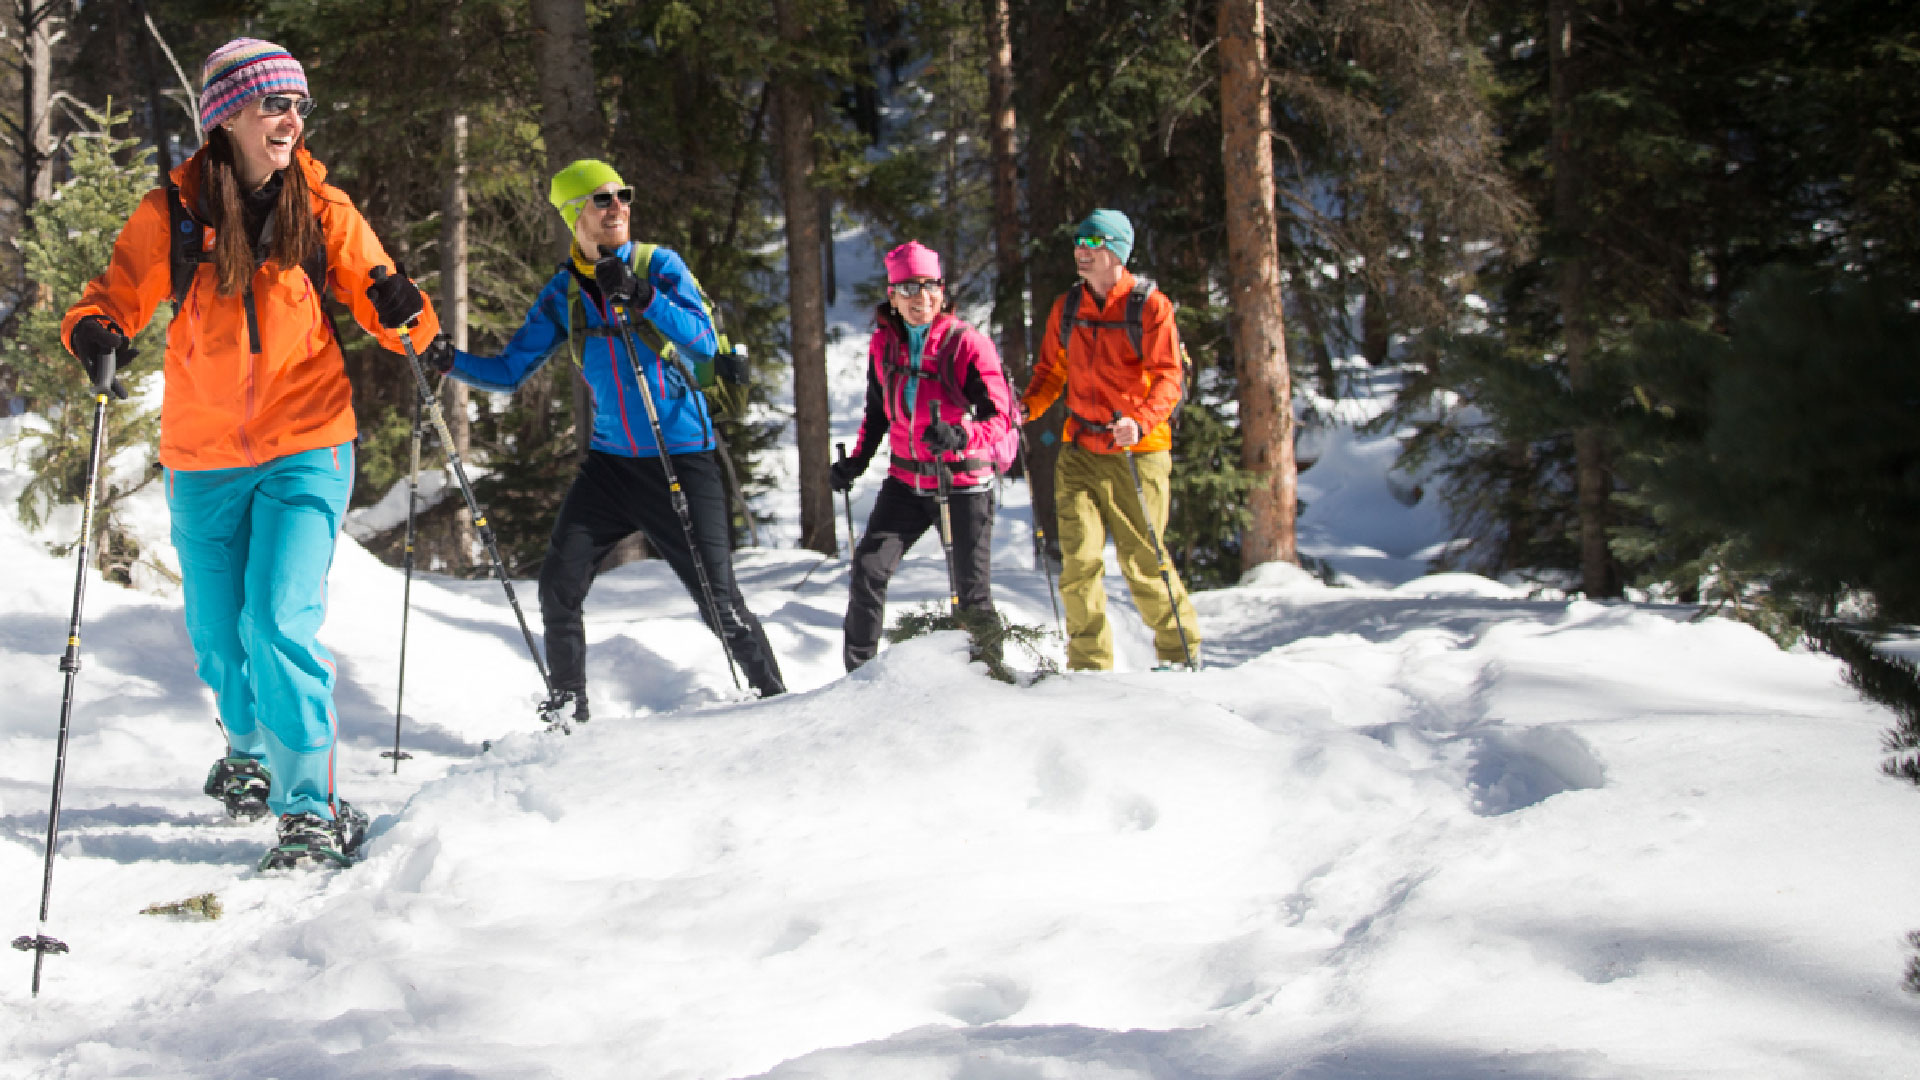 Guided Backcountry Snowshoeing Tour from White Pine Touring in Park City, UT.